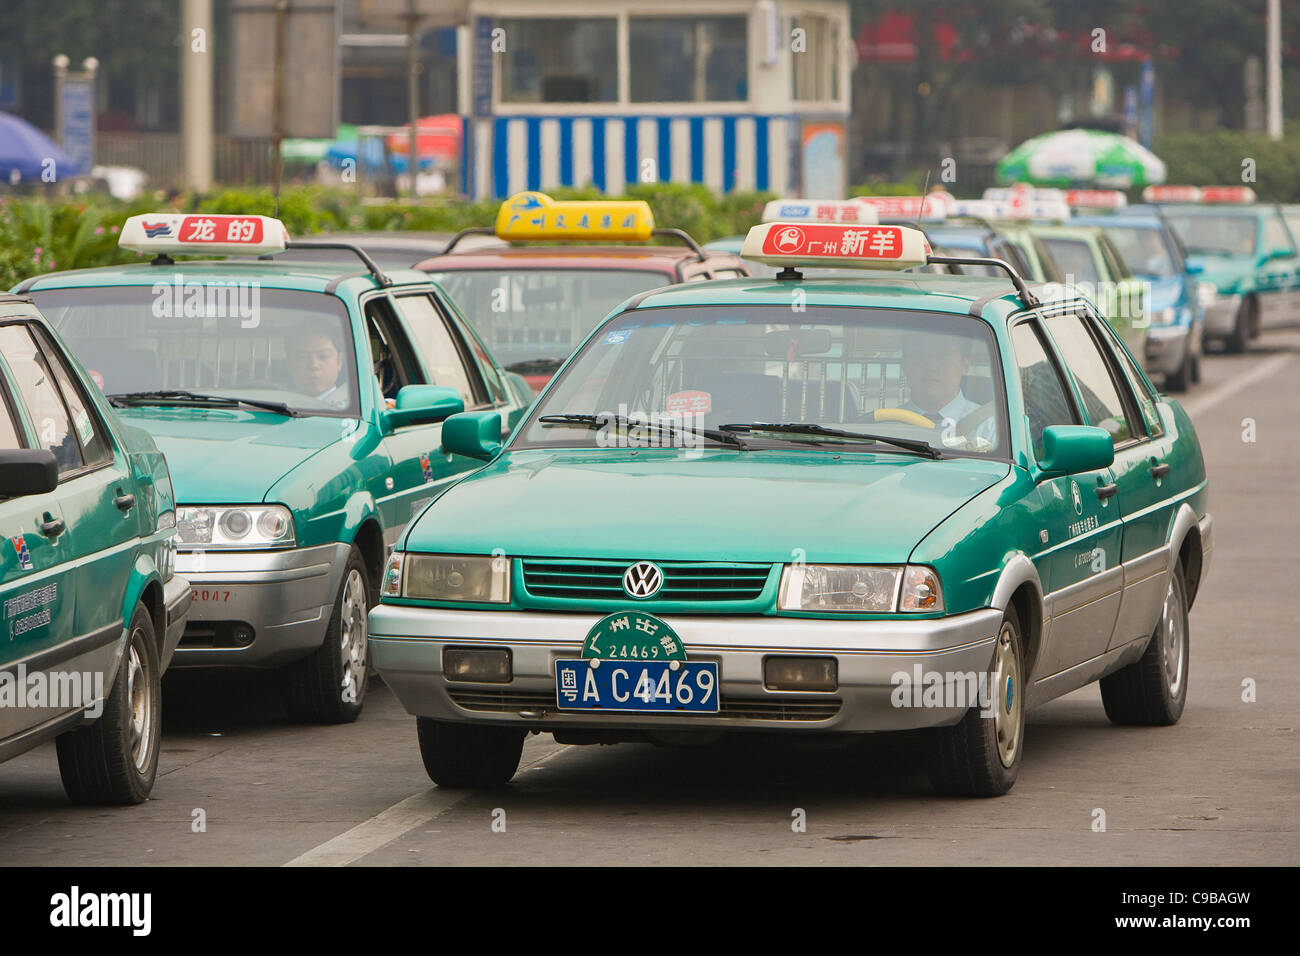 GUANGZHOU, GUANGDONG PROVINCE, CHINA - Taxis line up at train station, in the city of Guangzhou. Stock Photo